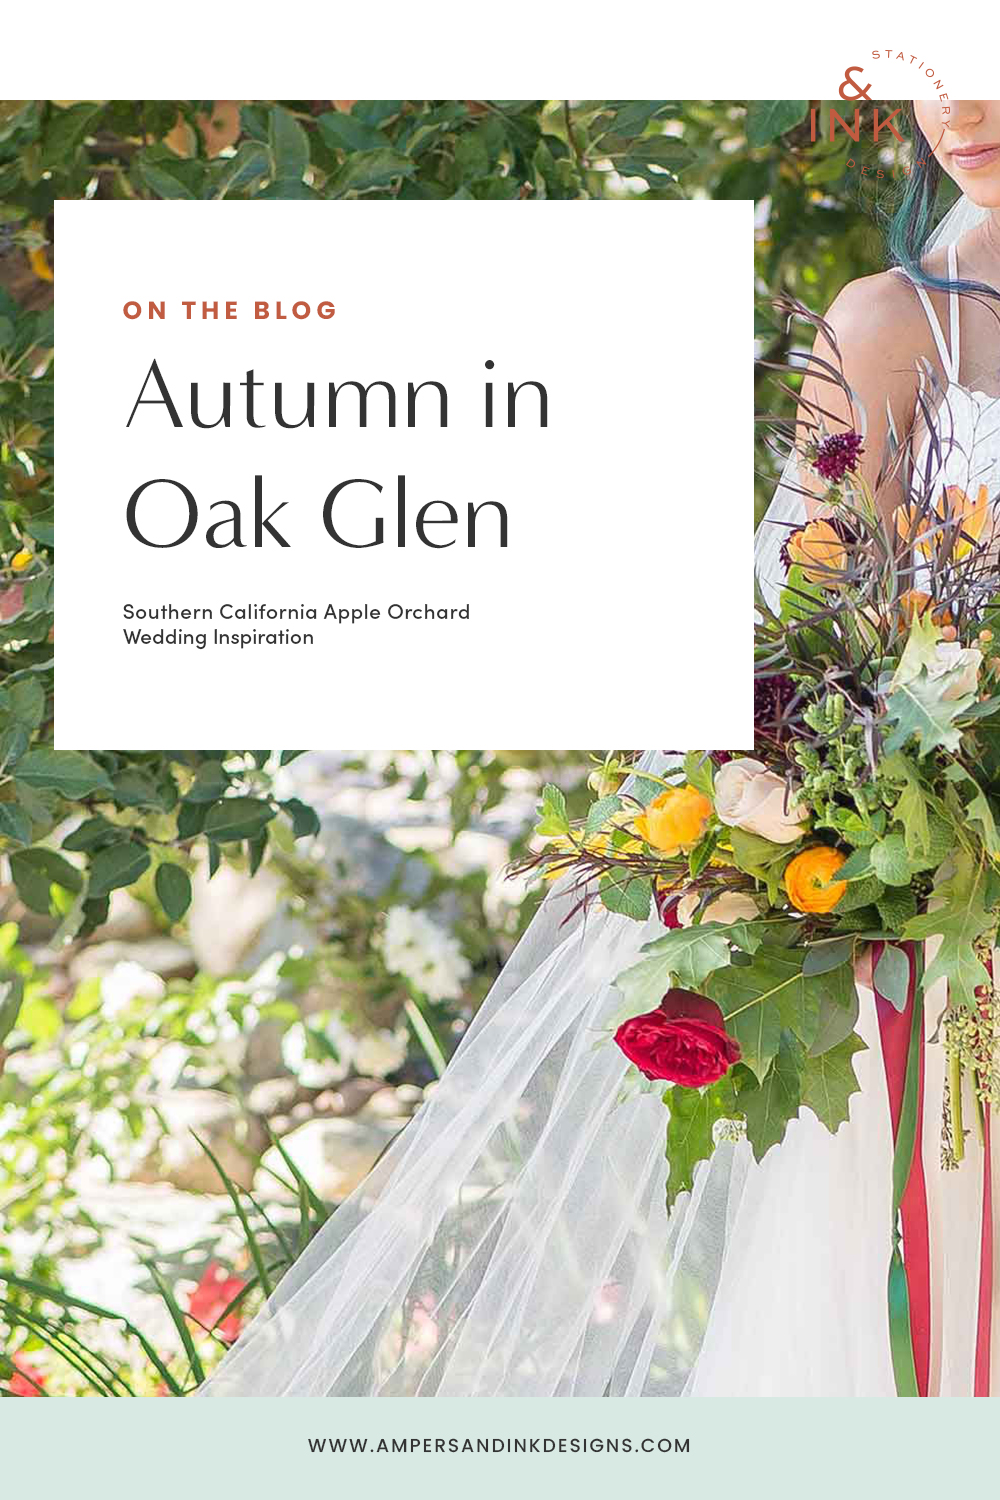 Hand-Picked Apples and Autumn Wedding Inspiration